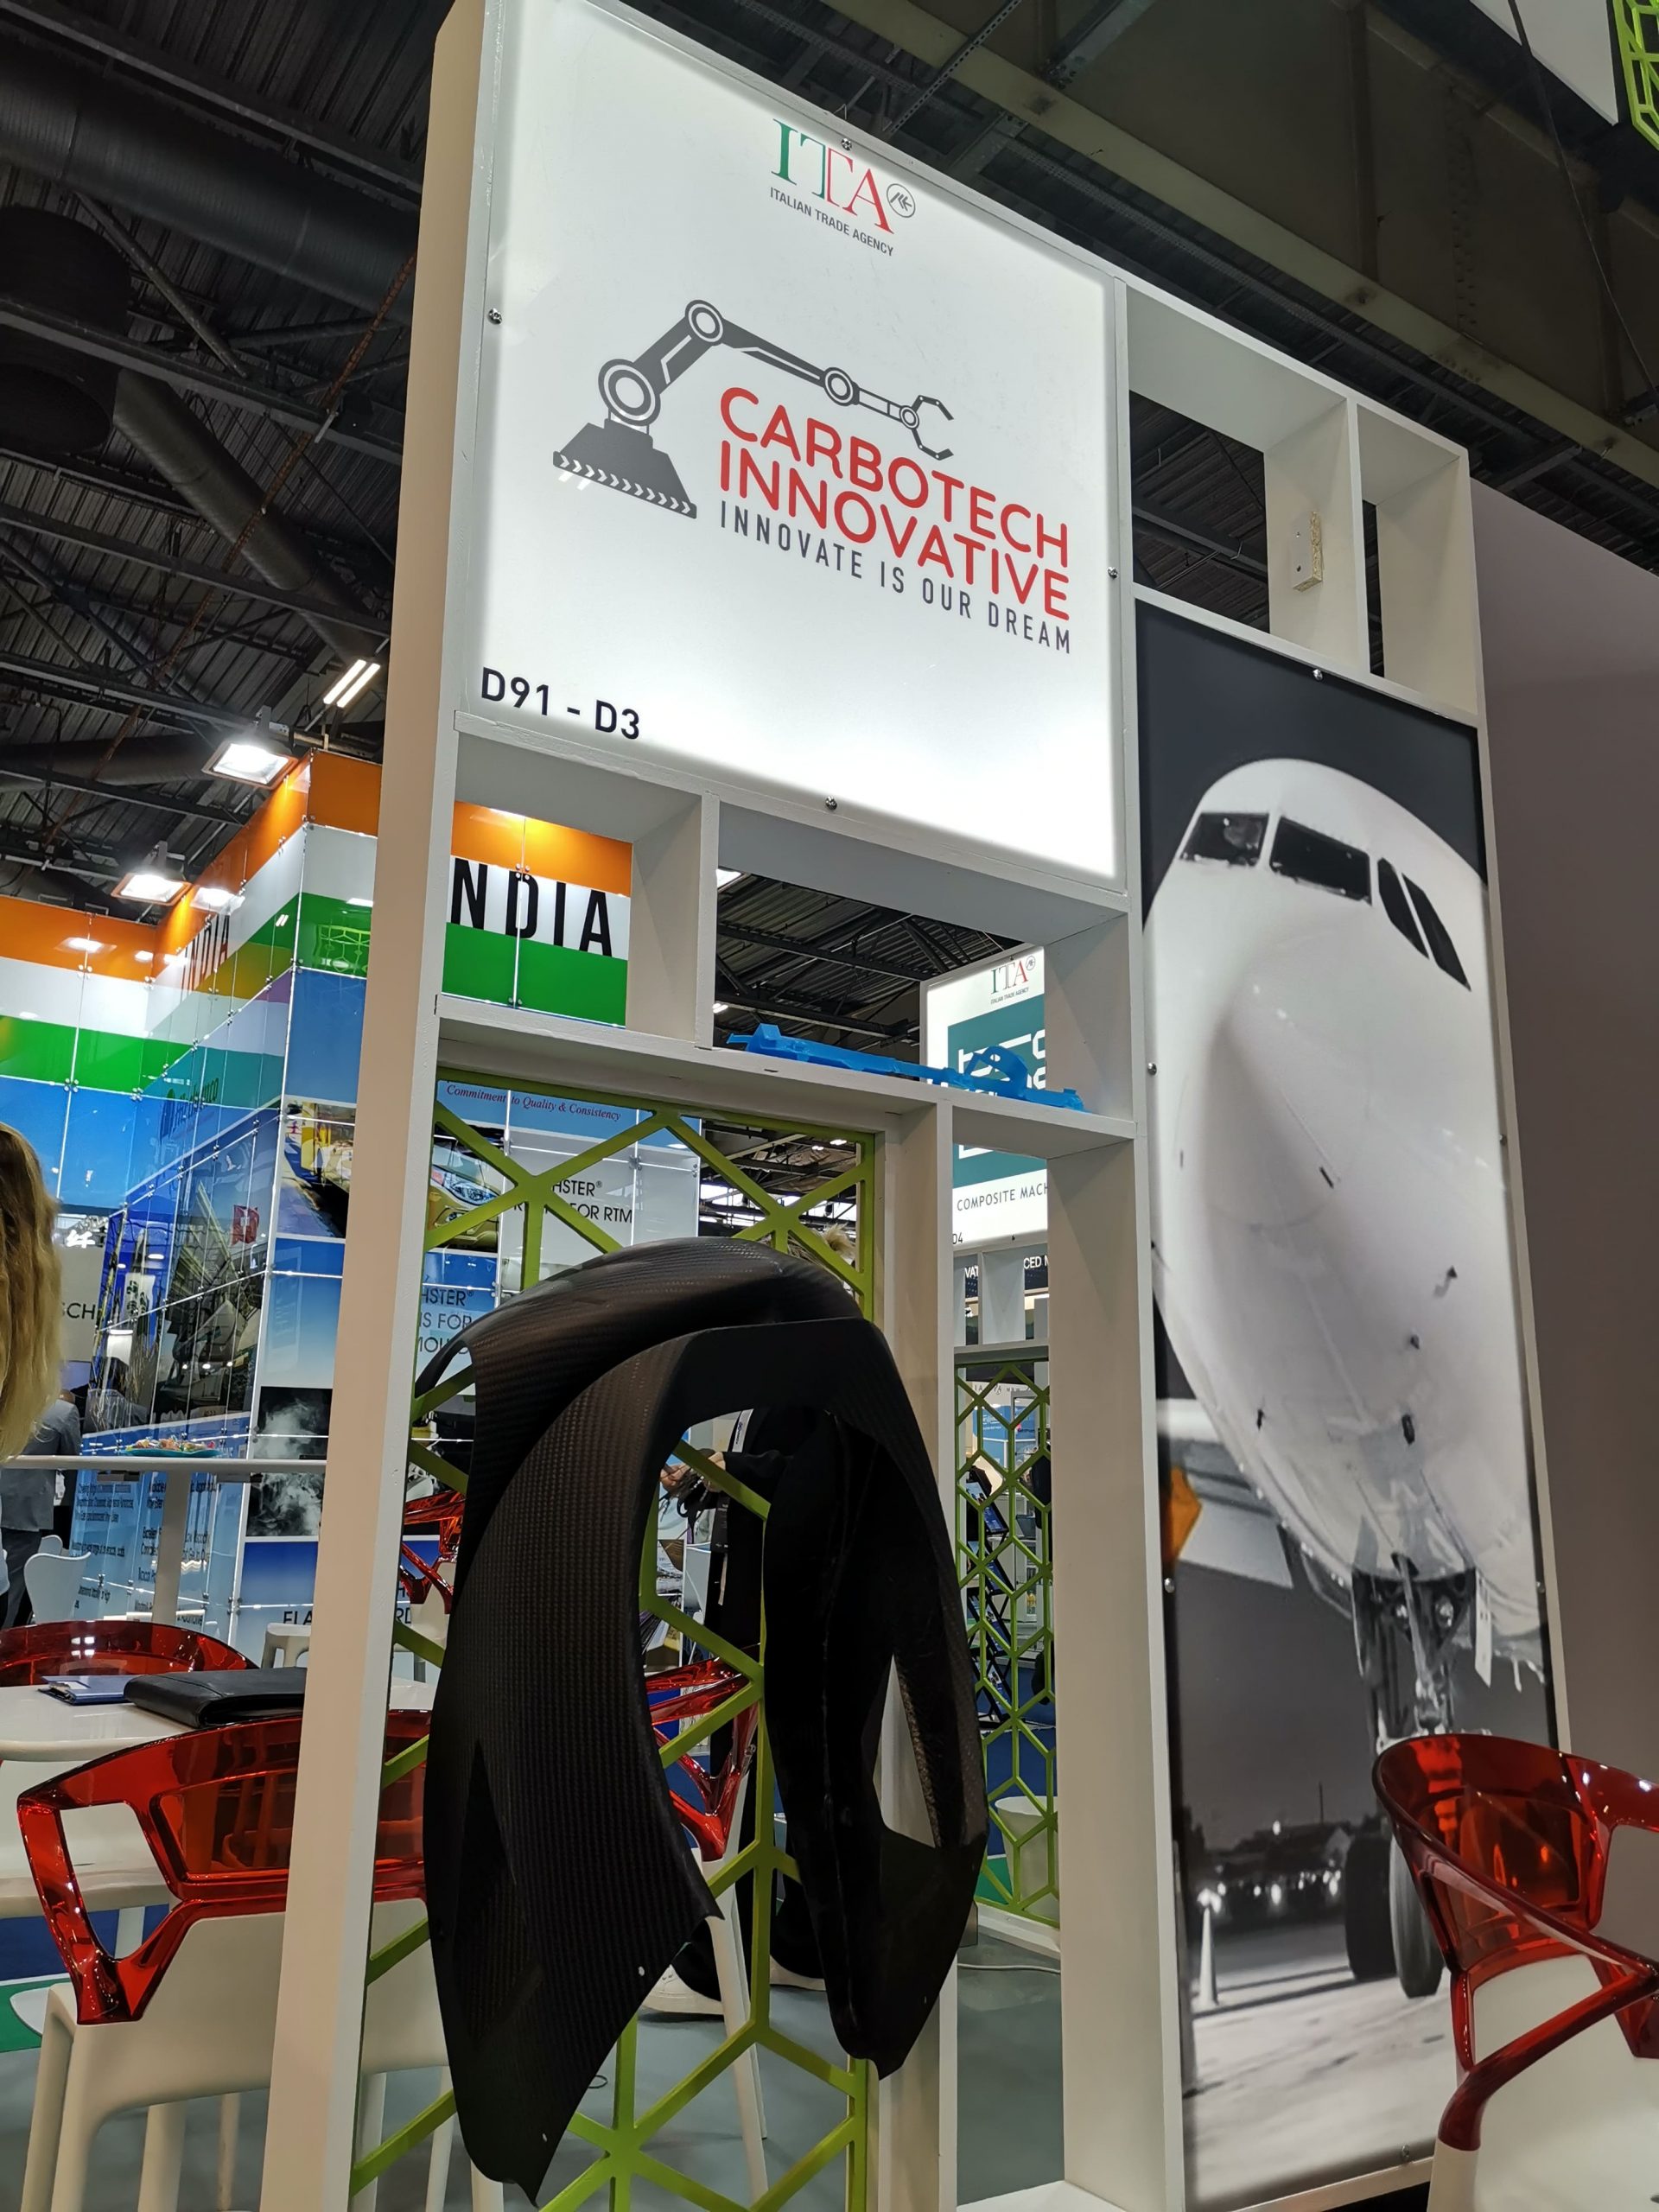 Carbotech Innovative at Jec World